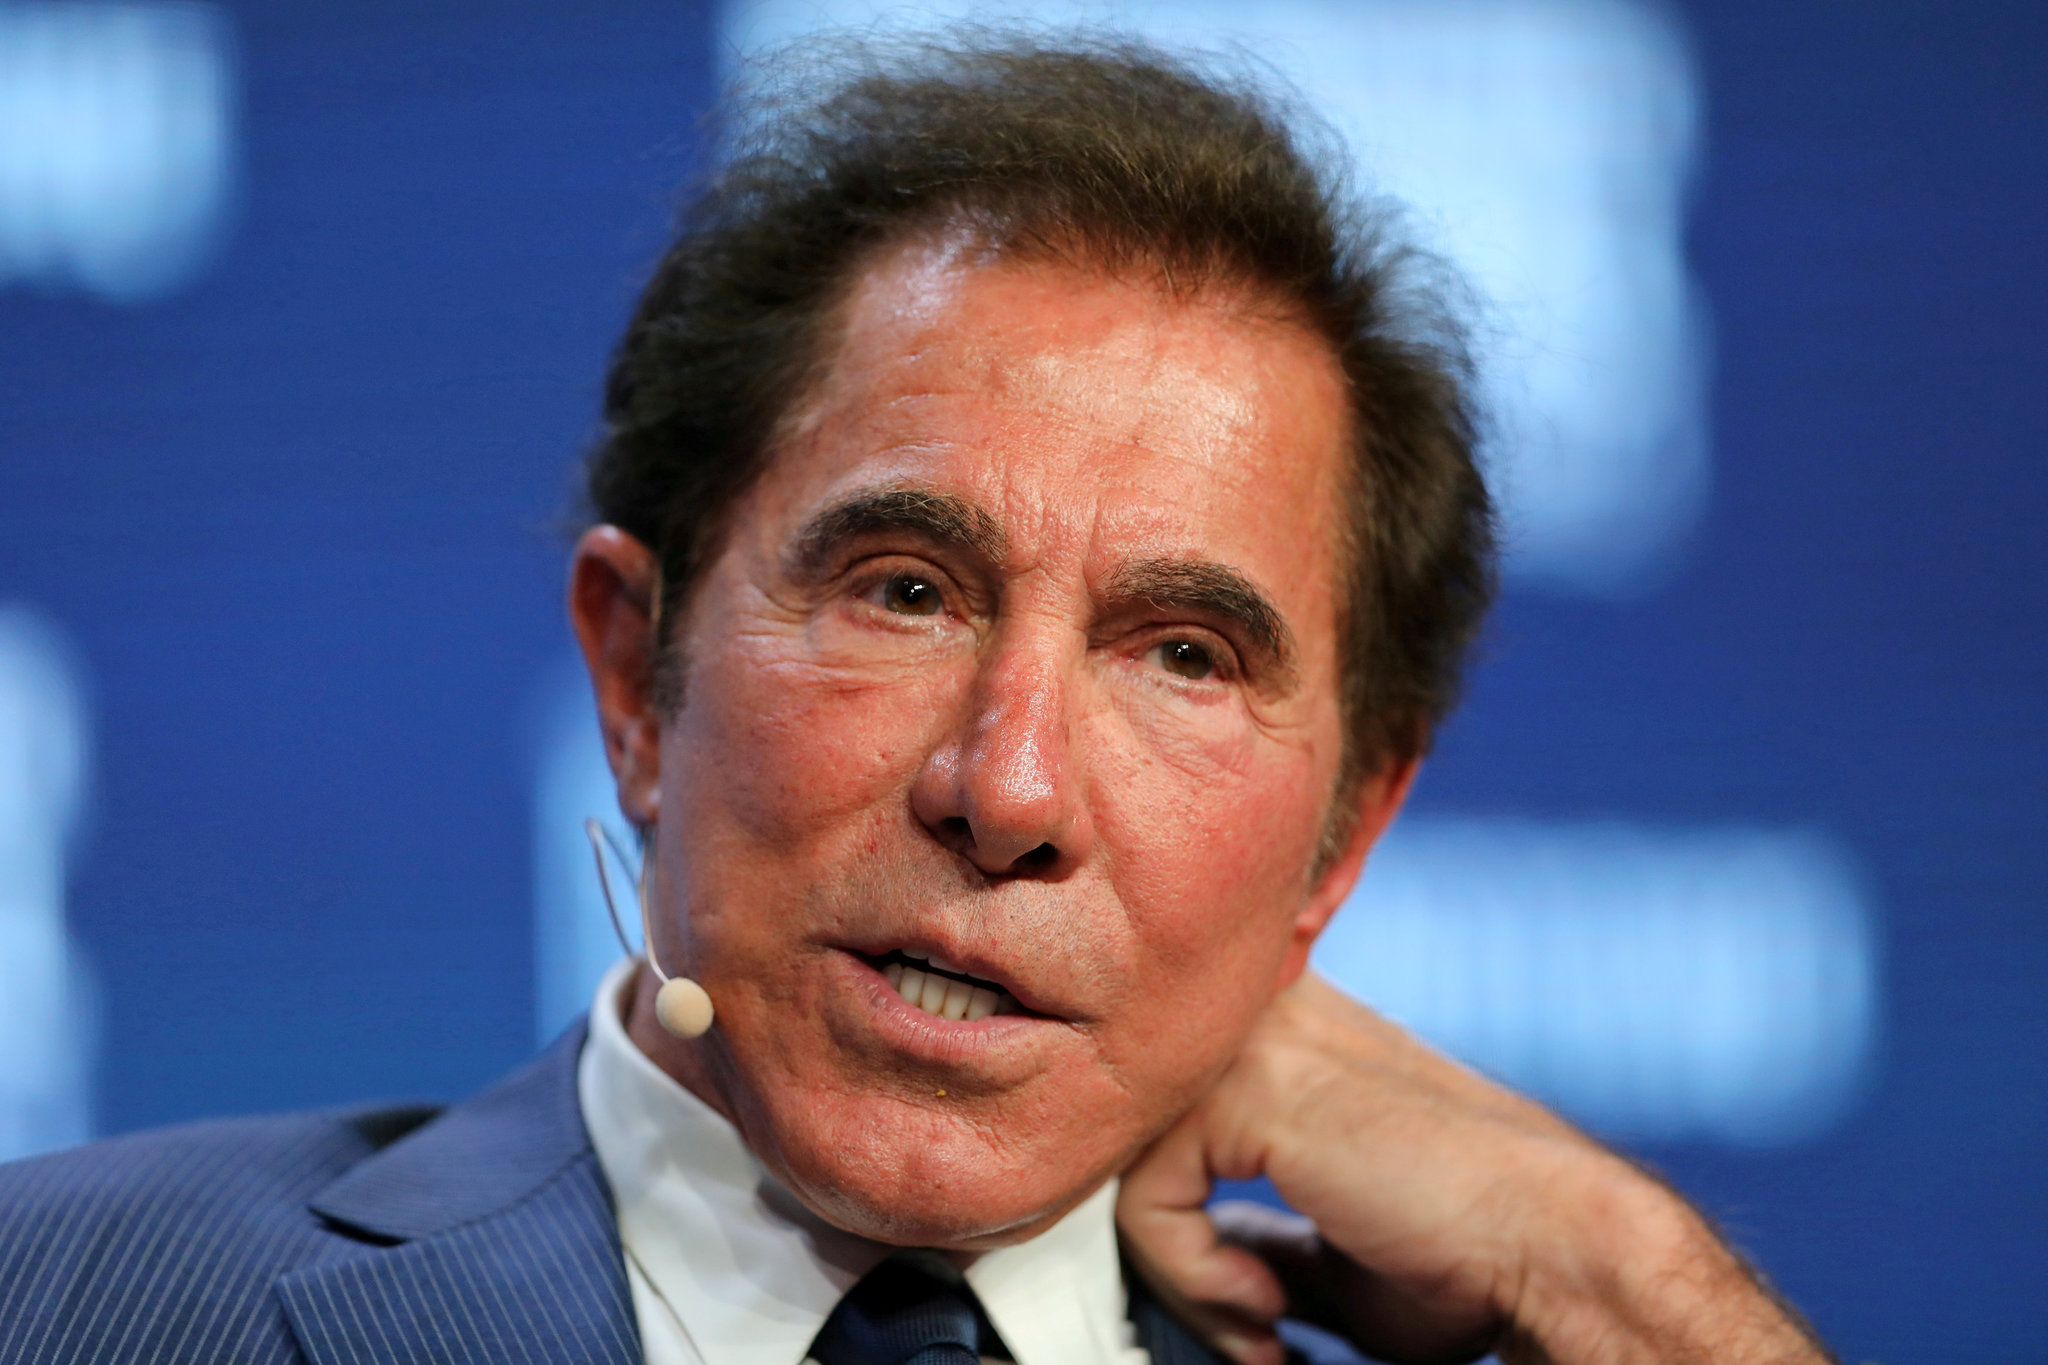 Billionaire Steve Wynn’s Lawyers Continue to Defend Their Client Aggressively